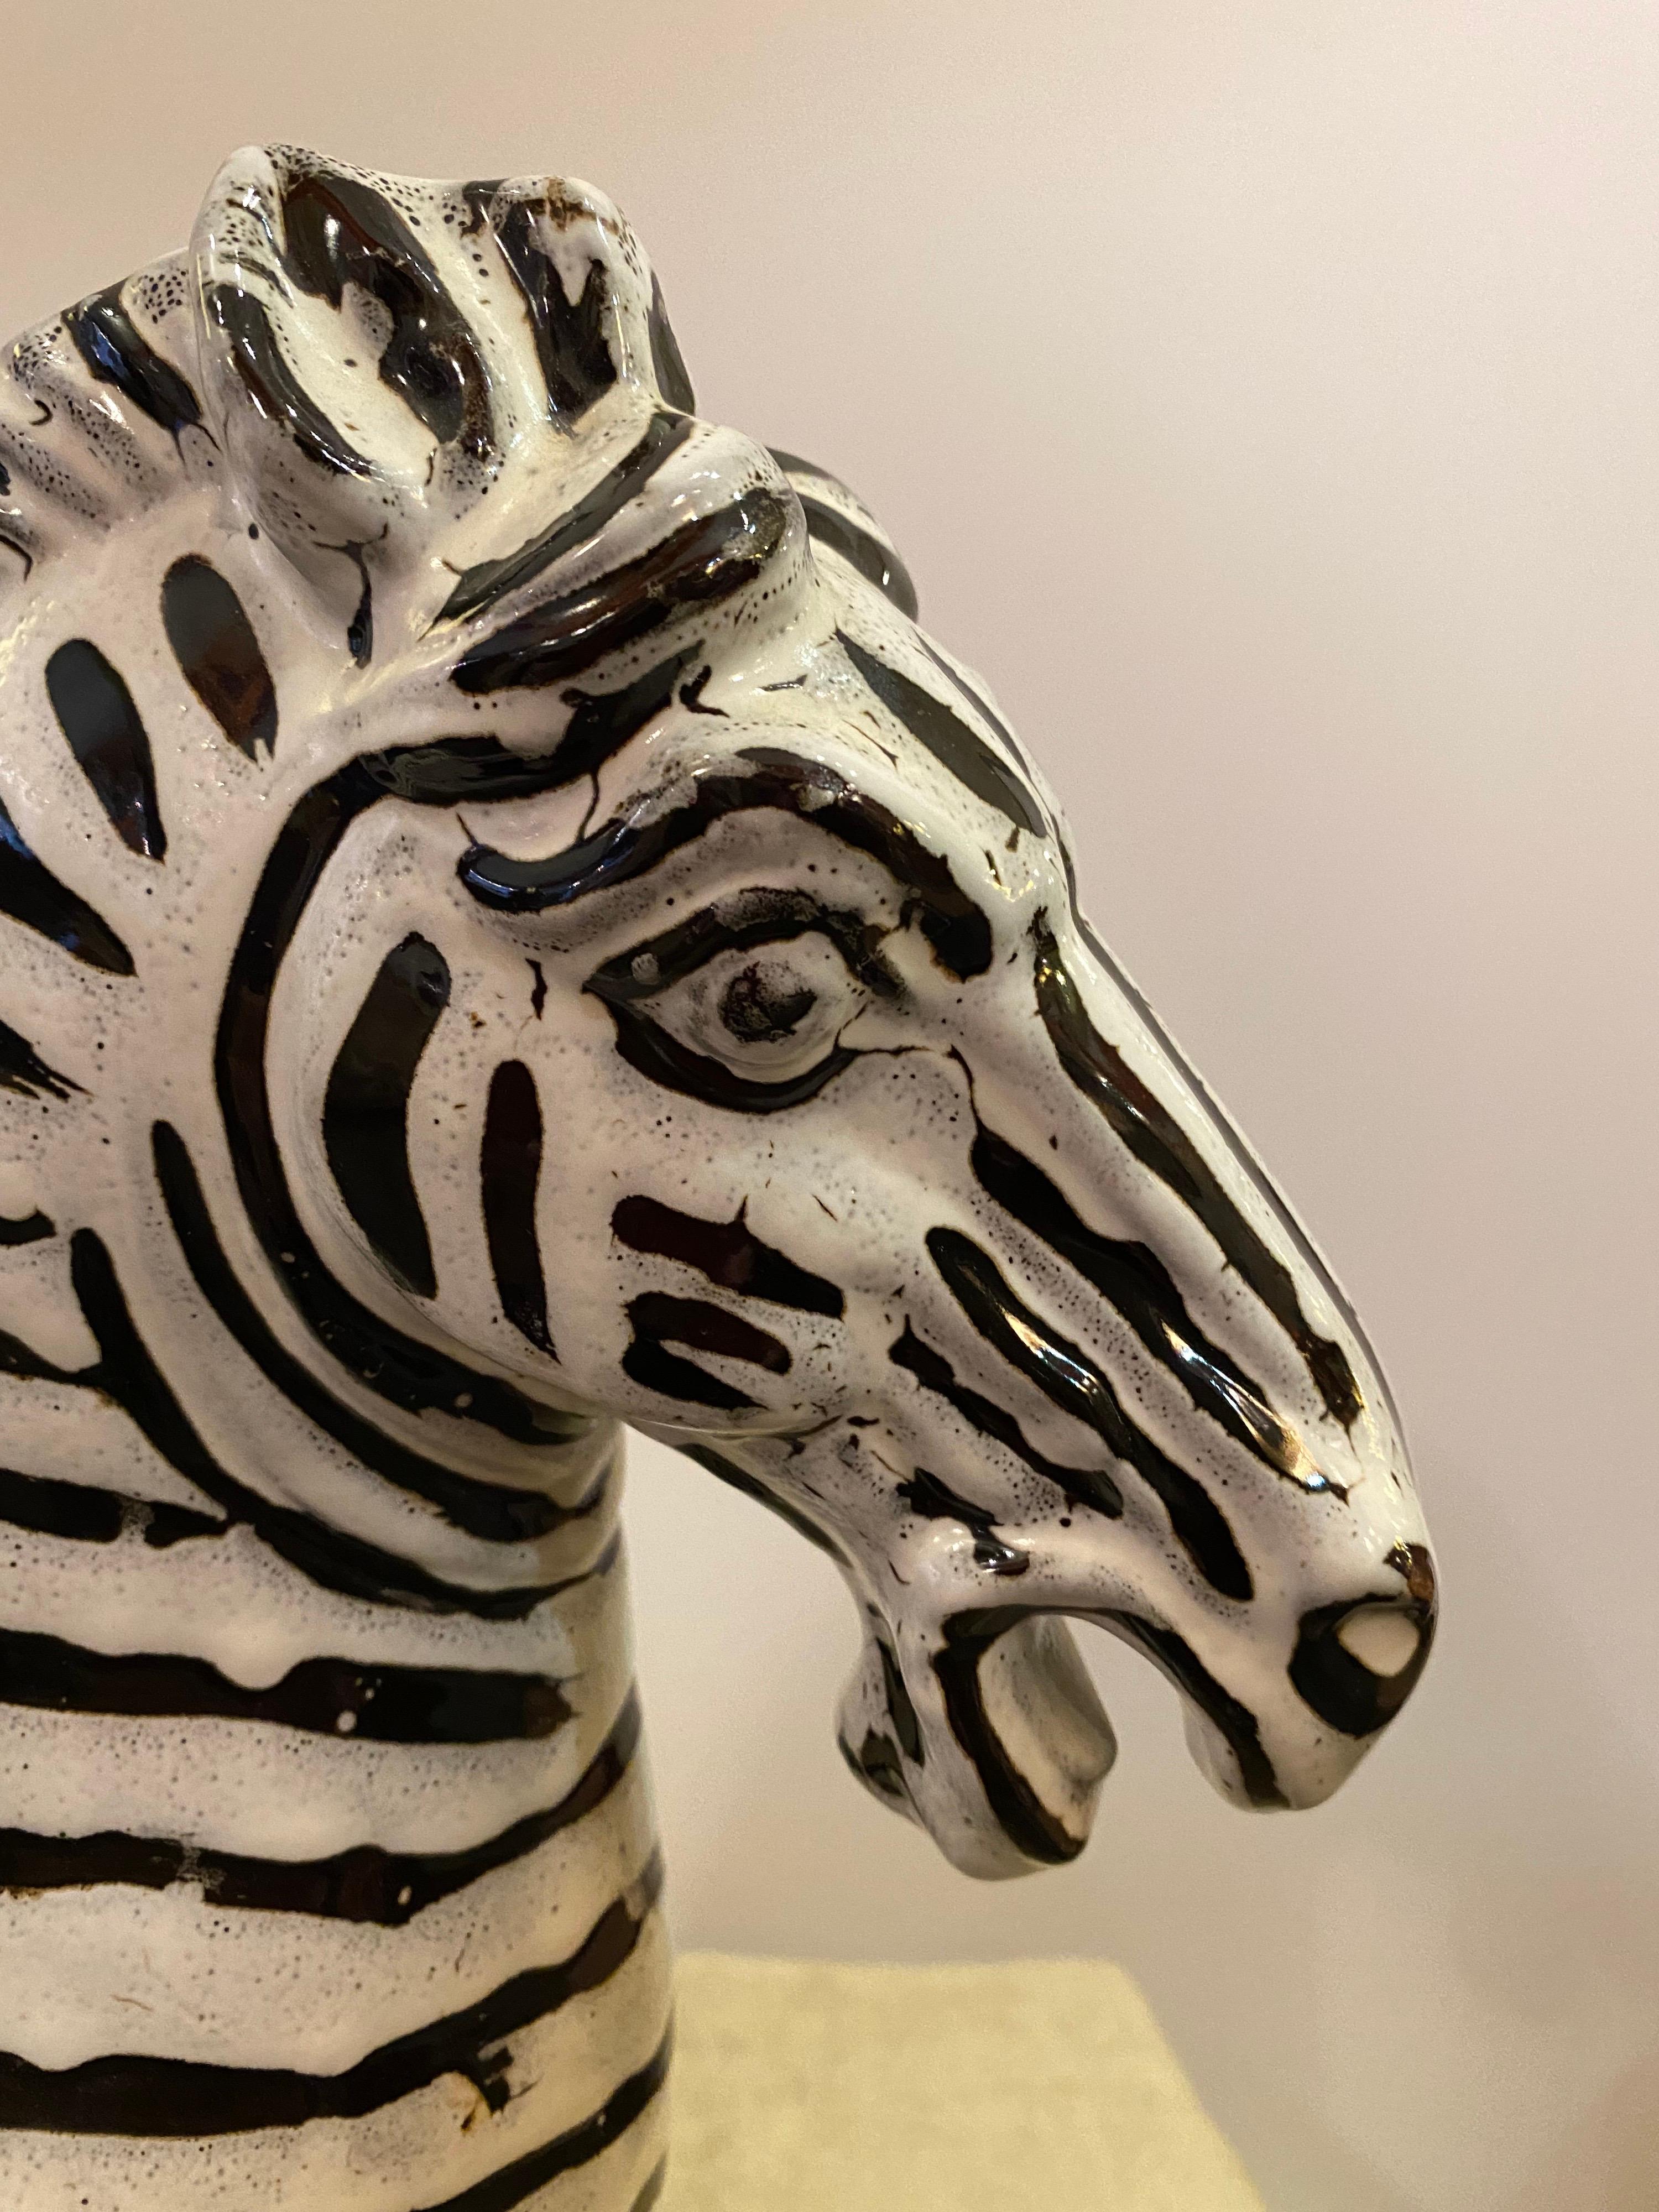 Large ceramic Zebra with stripes! Not your typical painted Zebra! I'm guess this guy is a 70's or 80's Zebra. Nice heavy glaze done in stripes. Doesn't strike me as Italian, but thinking it might be from Portugal or Spain. Great look!